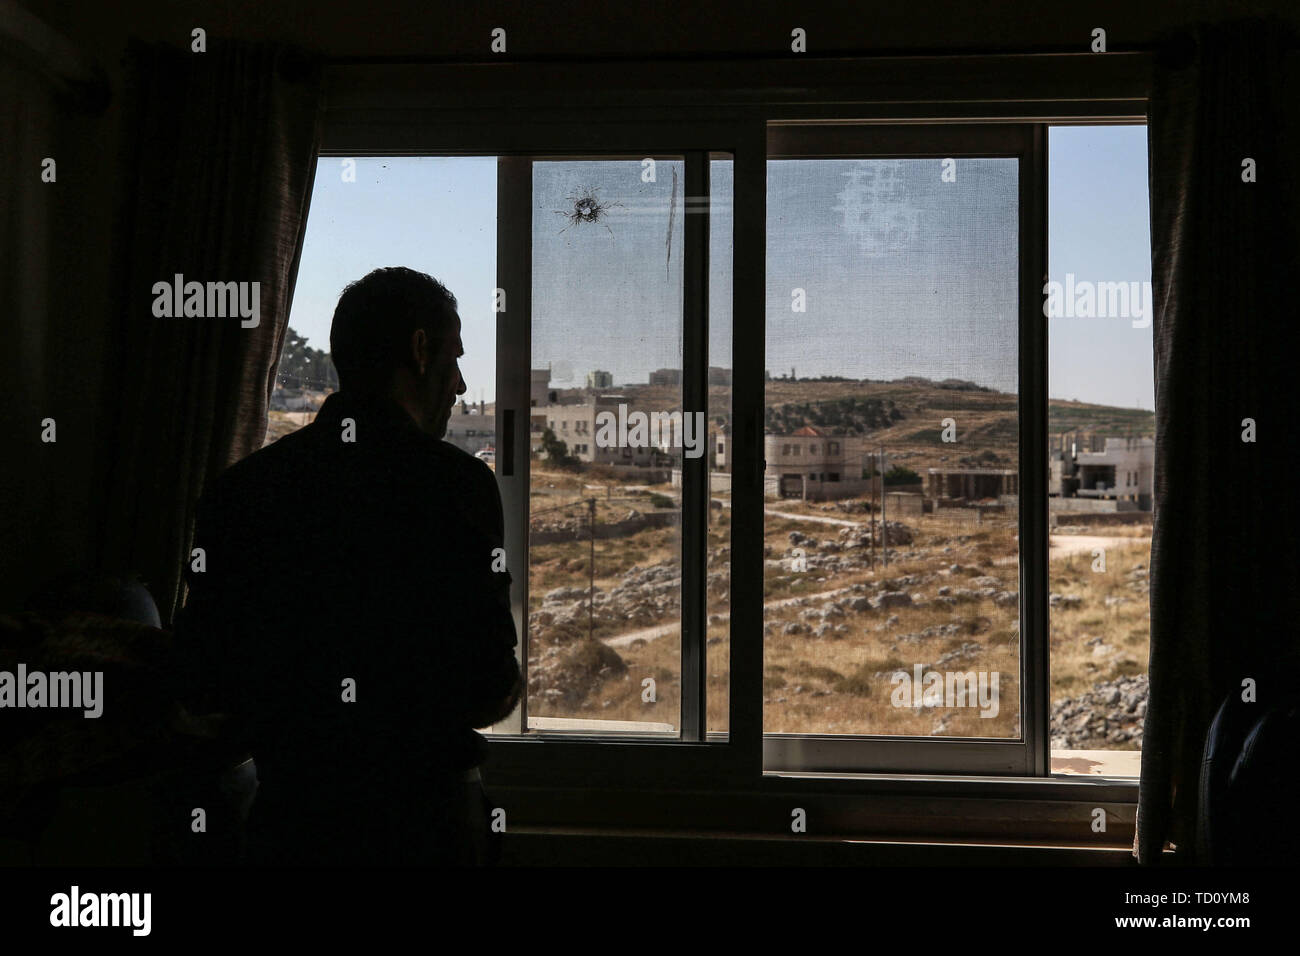 Nablus, Palestinian Territories. 11th June, 2019. A Palestinian security officer looks at a bullet hole inside the headquarters of the Palestinian Preventive Security (PPS), one of the security apparatus of the Palestinian Authority. In a rare incident Israeli soldiers had a shootout with Palestinian security forces over a case of mistaken identity. Reportedly only two Palestinians were injured. Credit: Ayman Nobani/dpa/Alamy Live News Stock Photo